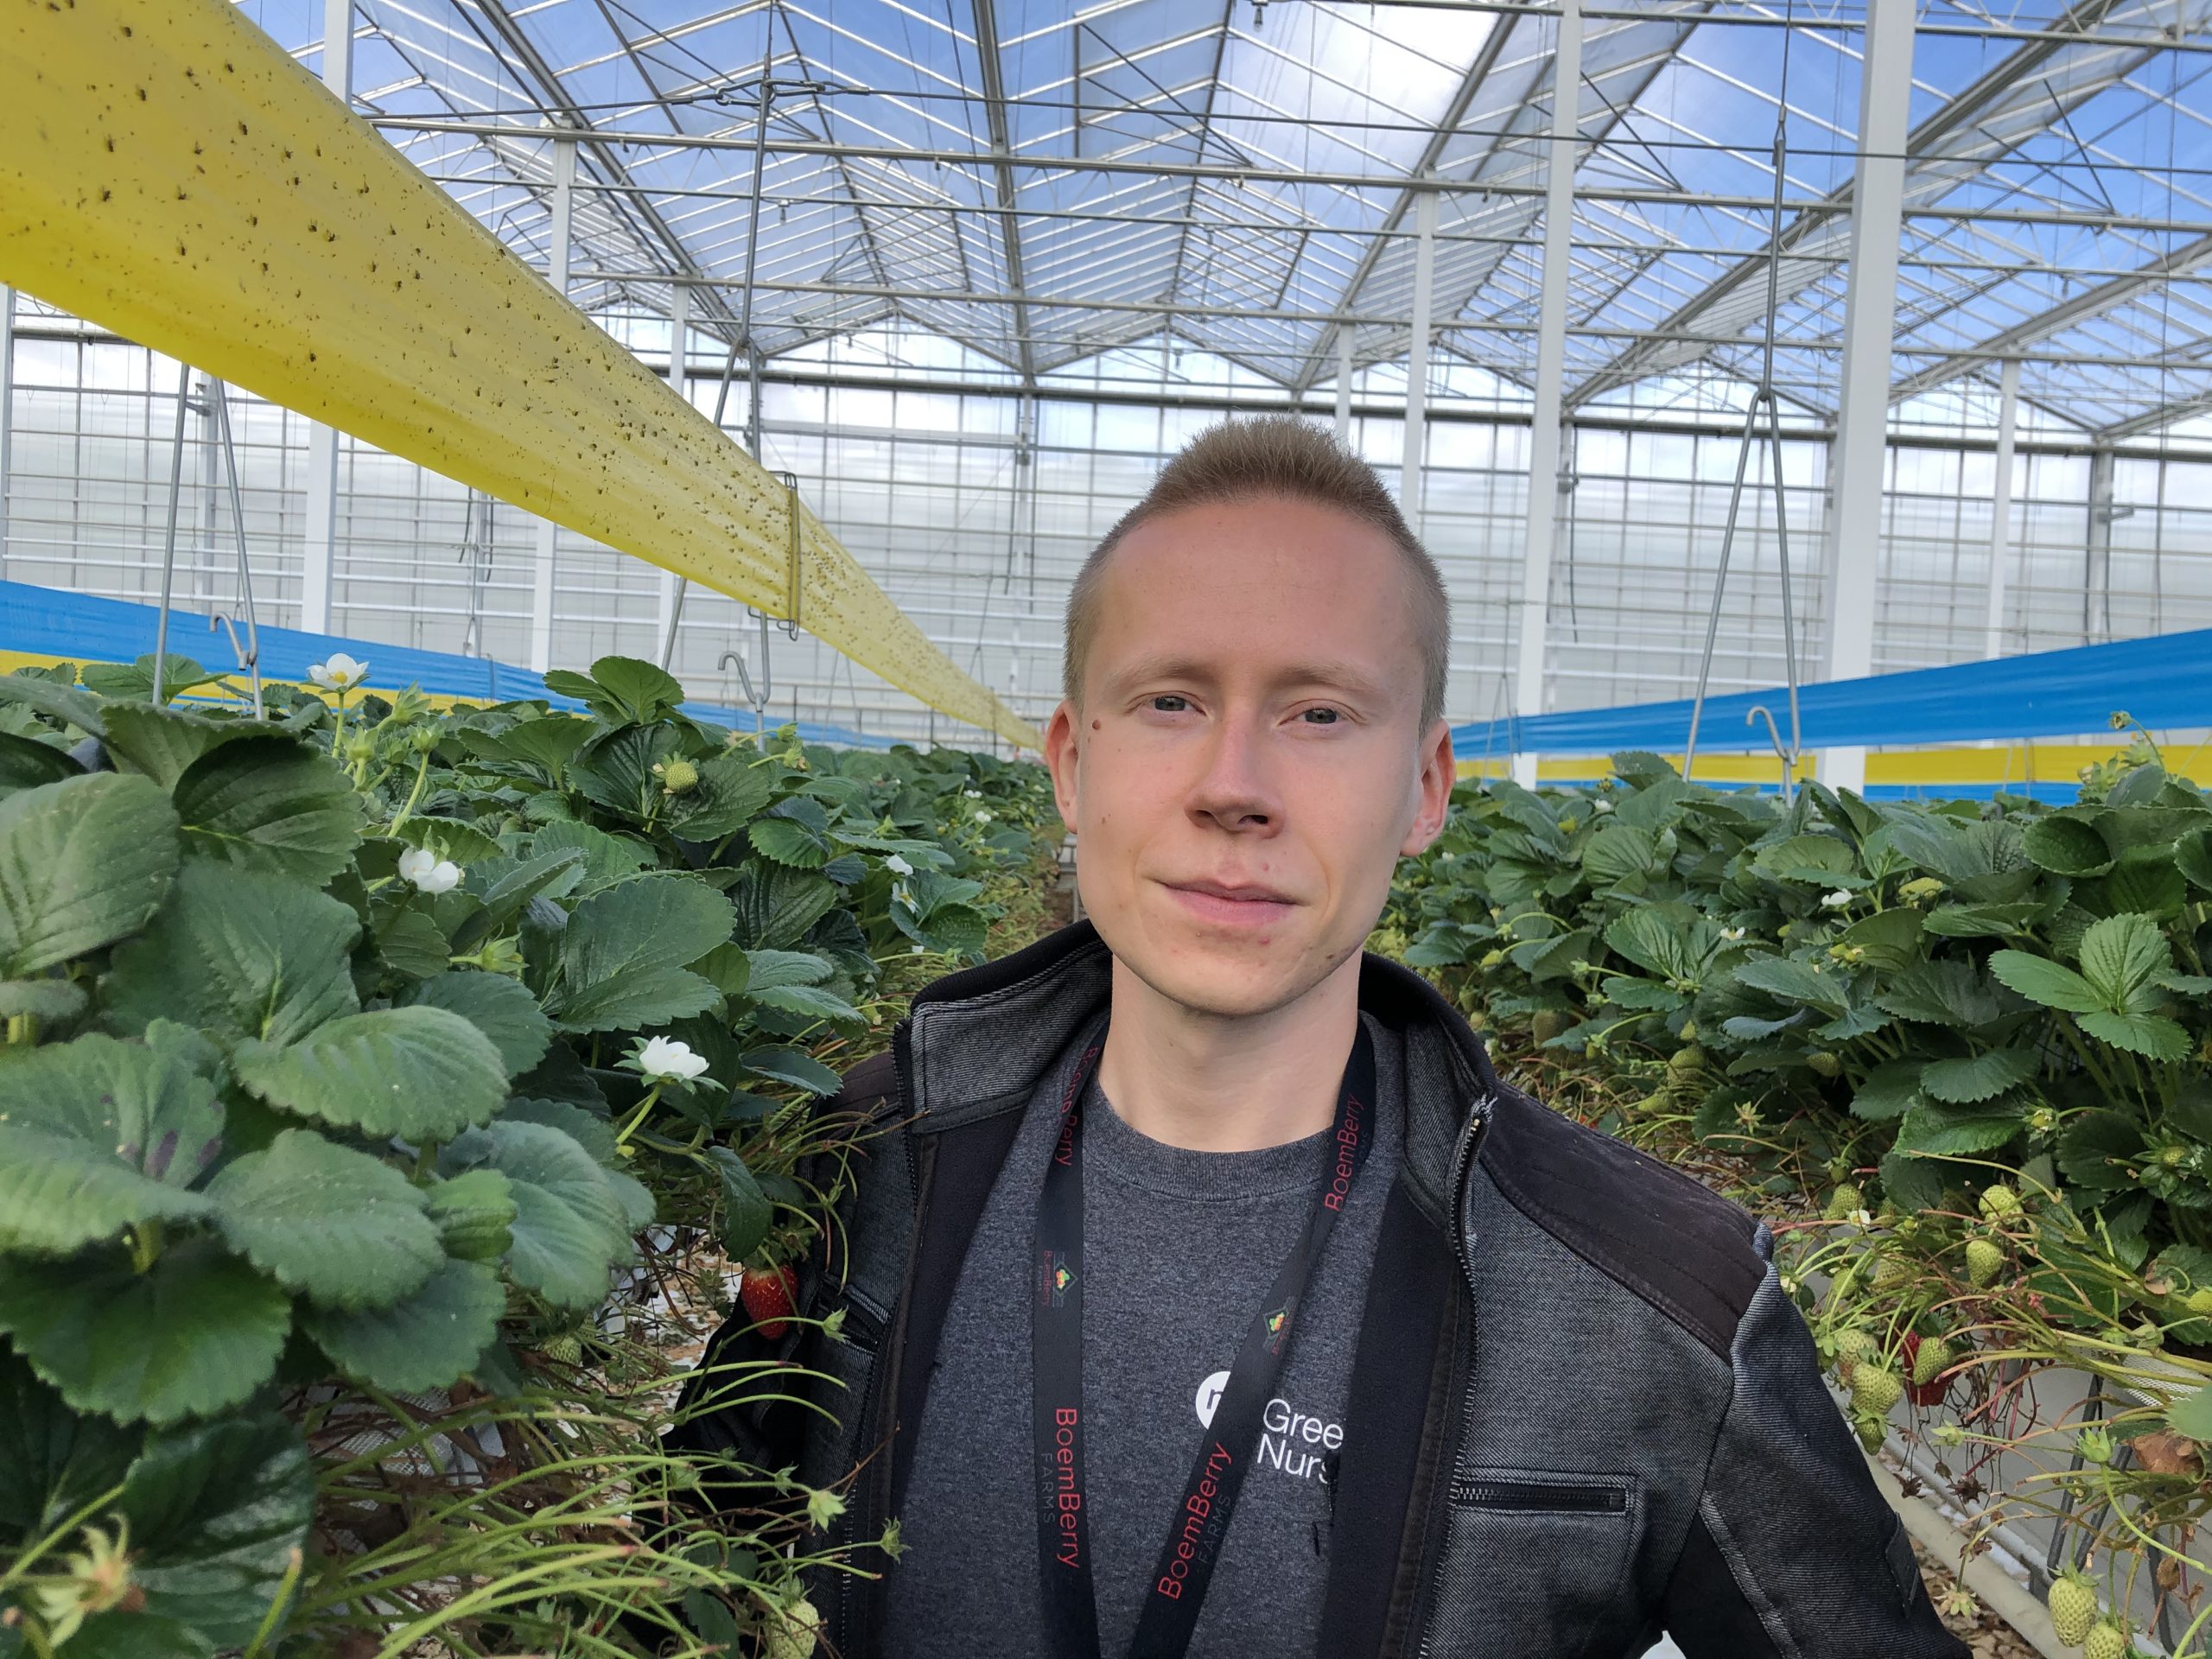 Vladimir Rogov is a 2020 graduate of Niagara College’s Greenhouse Technician program and research assistant with R&I